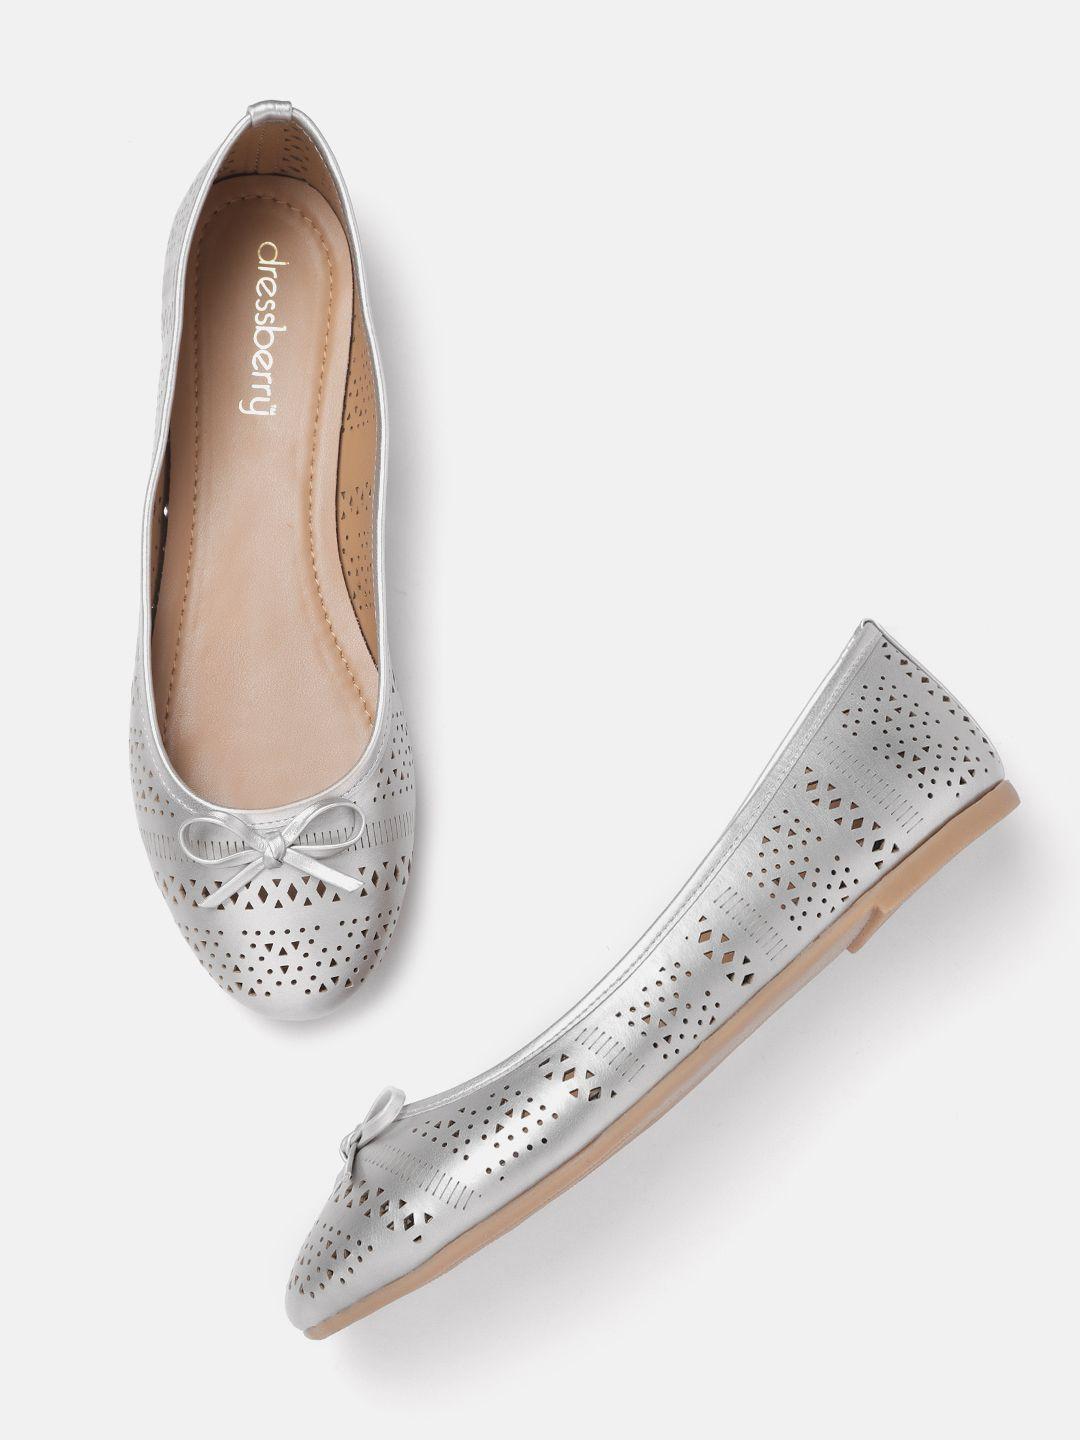 dressberry women muted silver-toned laser cut ballerinas with bow detail